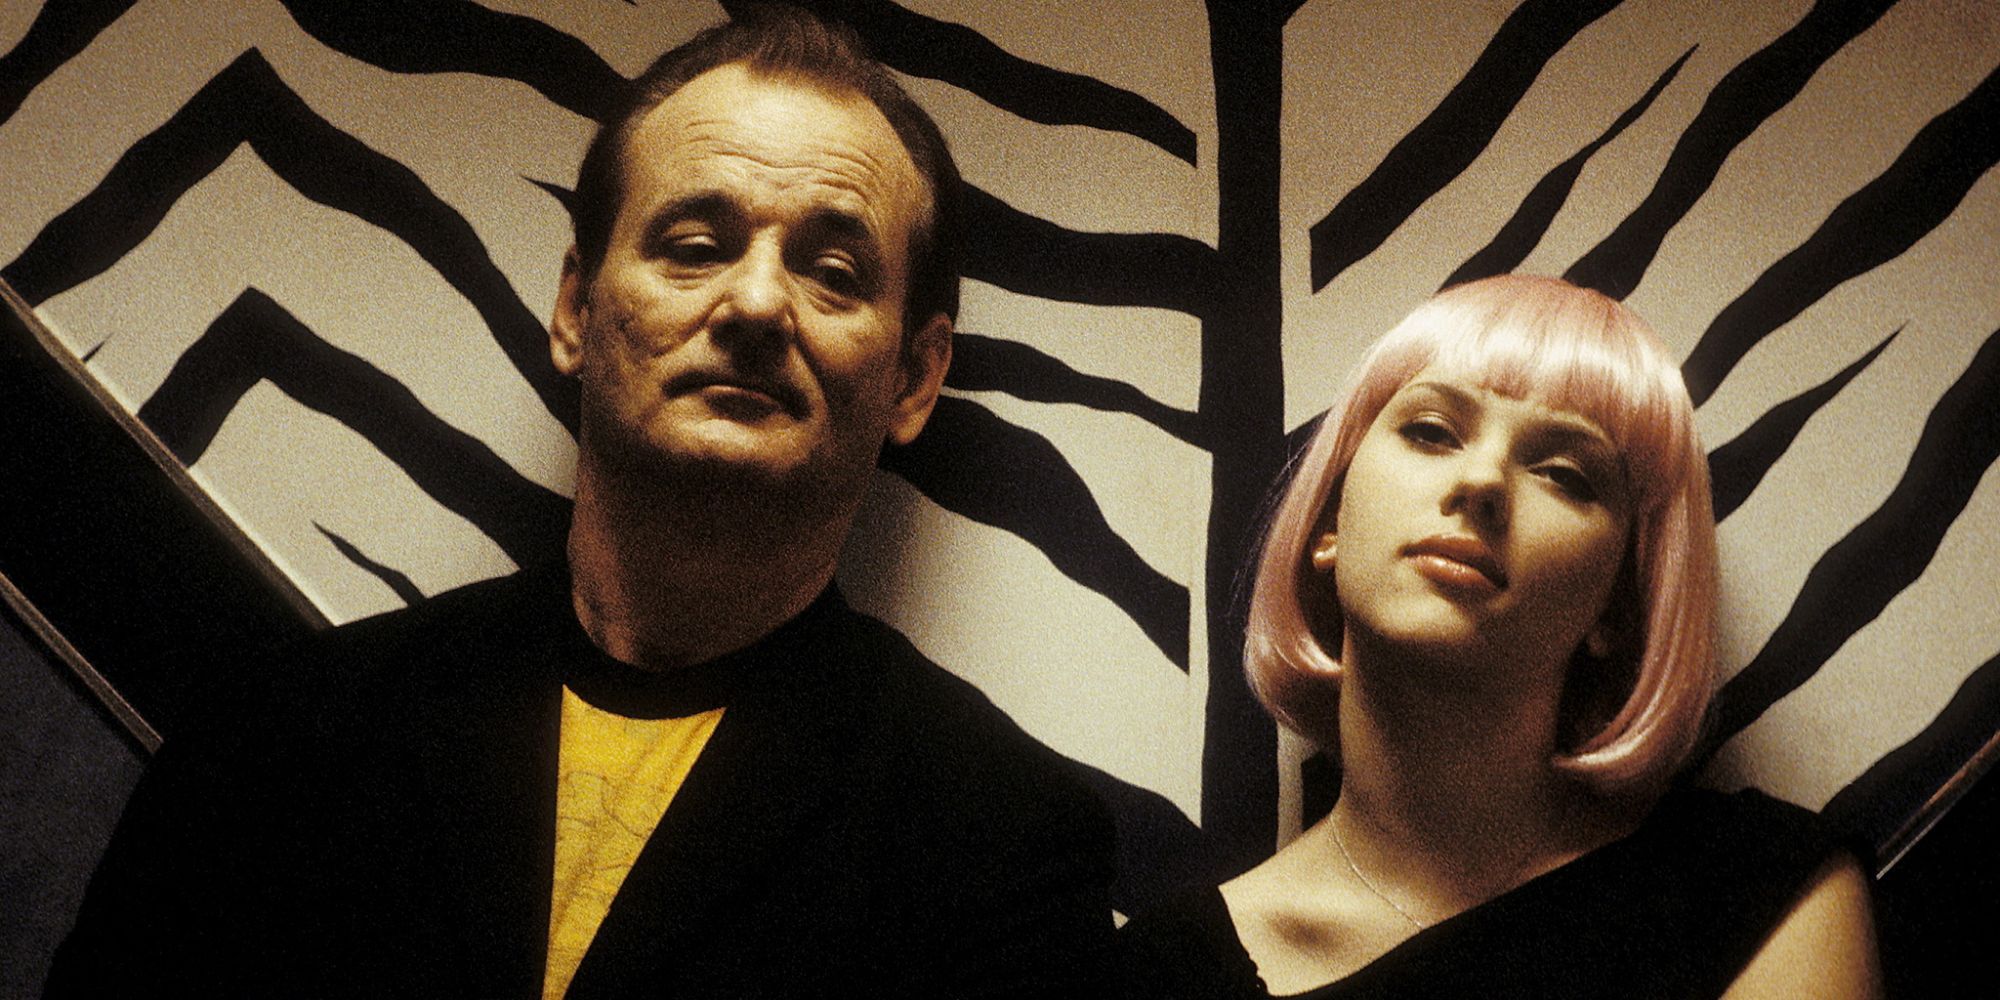 Bill Murray and Scarlett Johansson sitting side by side as Bob and Charlotte in 'Lost in Translation'.